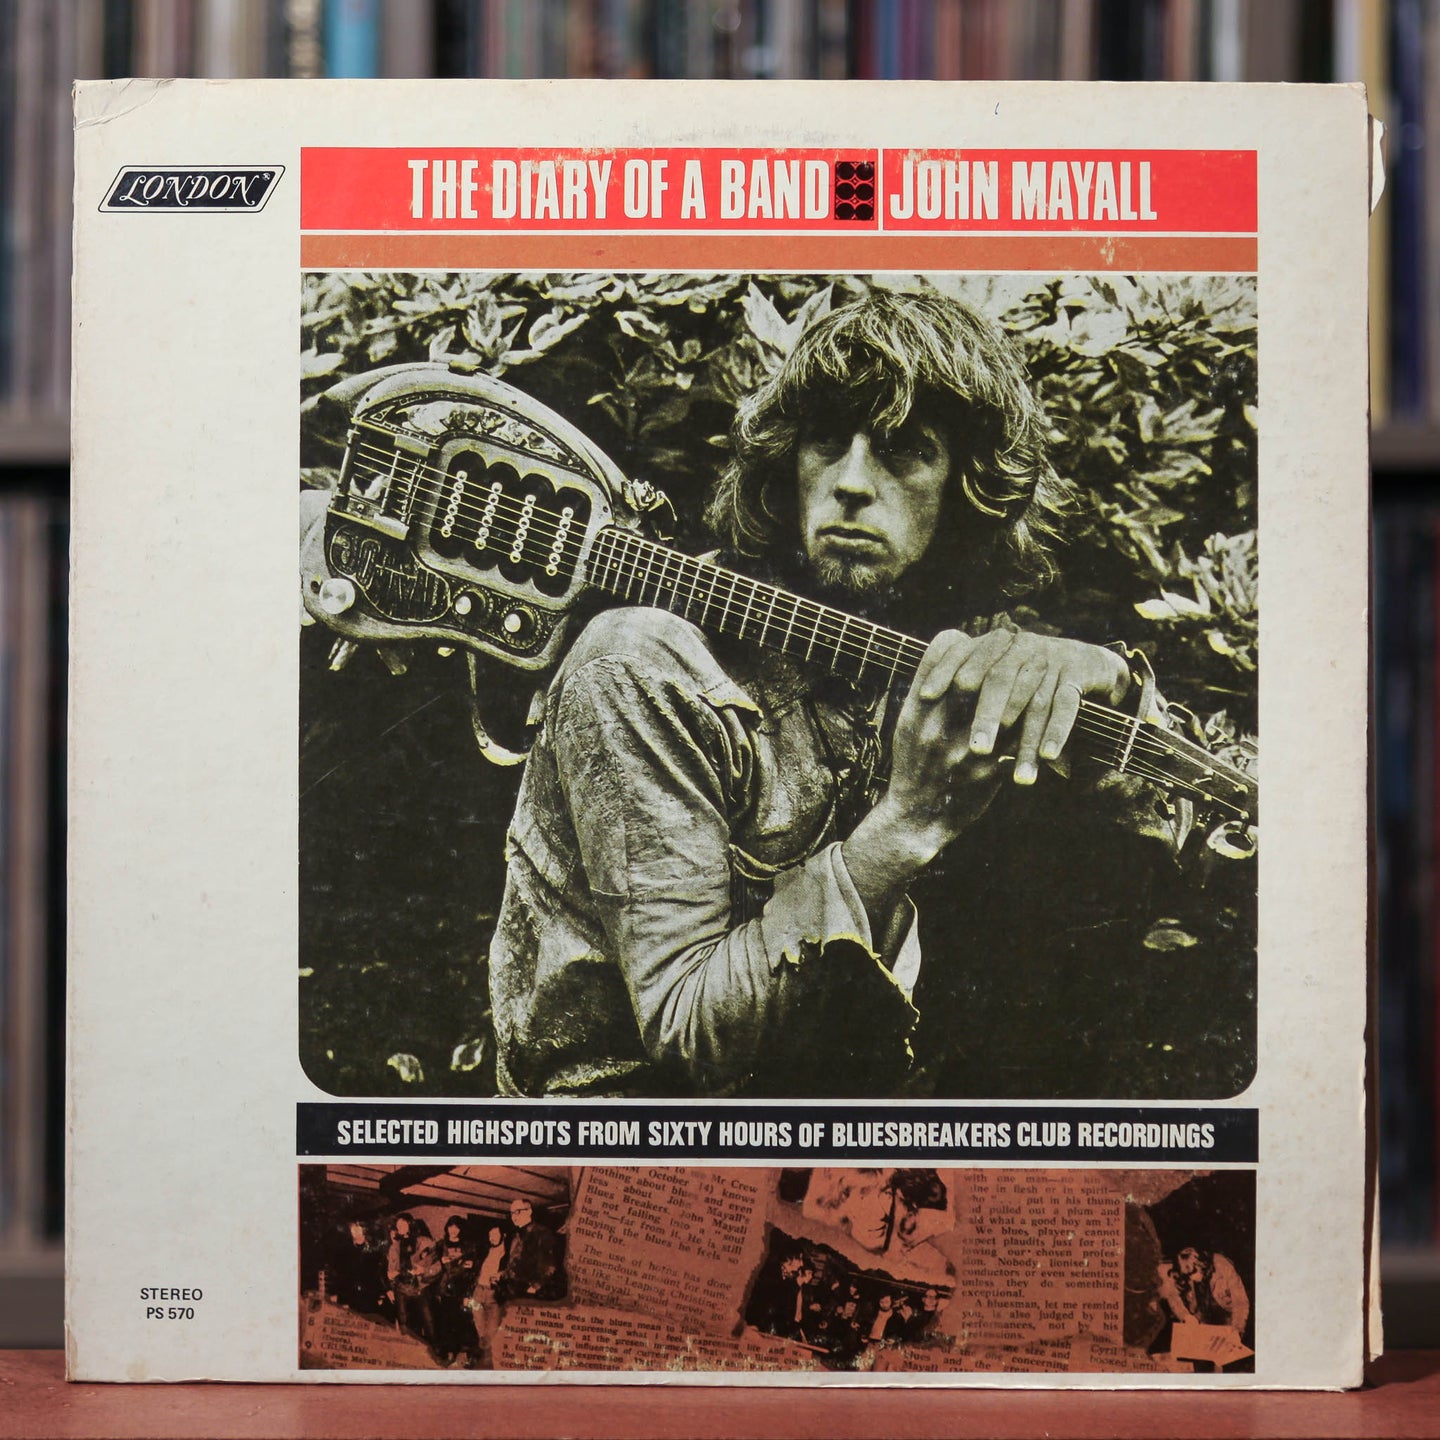 John Mayall And The Bluesbreakers - The Diary Of A Band - Selected Highspots From Sixty Hours Of Bluesbreakers Club Recordings - 1968 London, VG+/VG